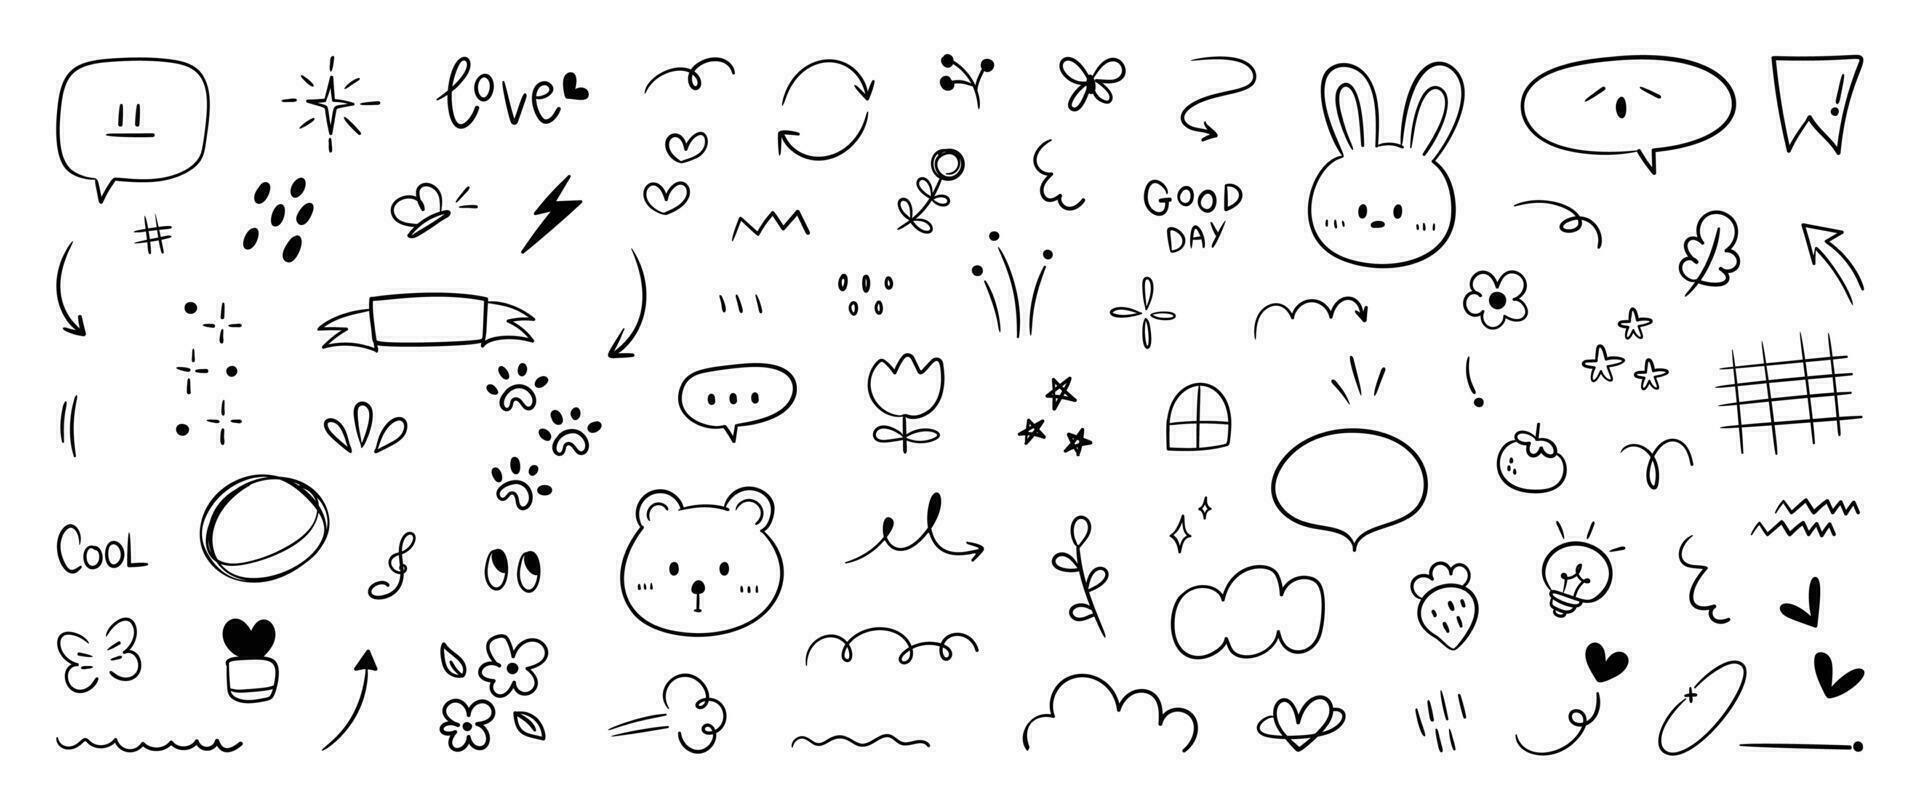 Set of cute pen line doodle element vector. Hand drawn doodle style collection of speech bubble, arrow, thunderbolt, star, rabbit, bear. Design for decoration, sticker, idol poster, social media. vector